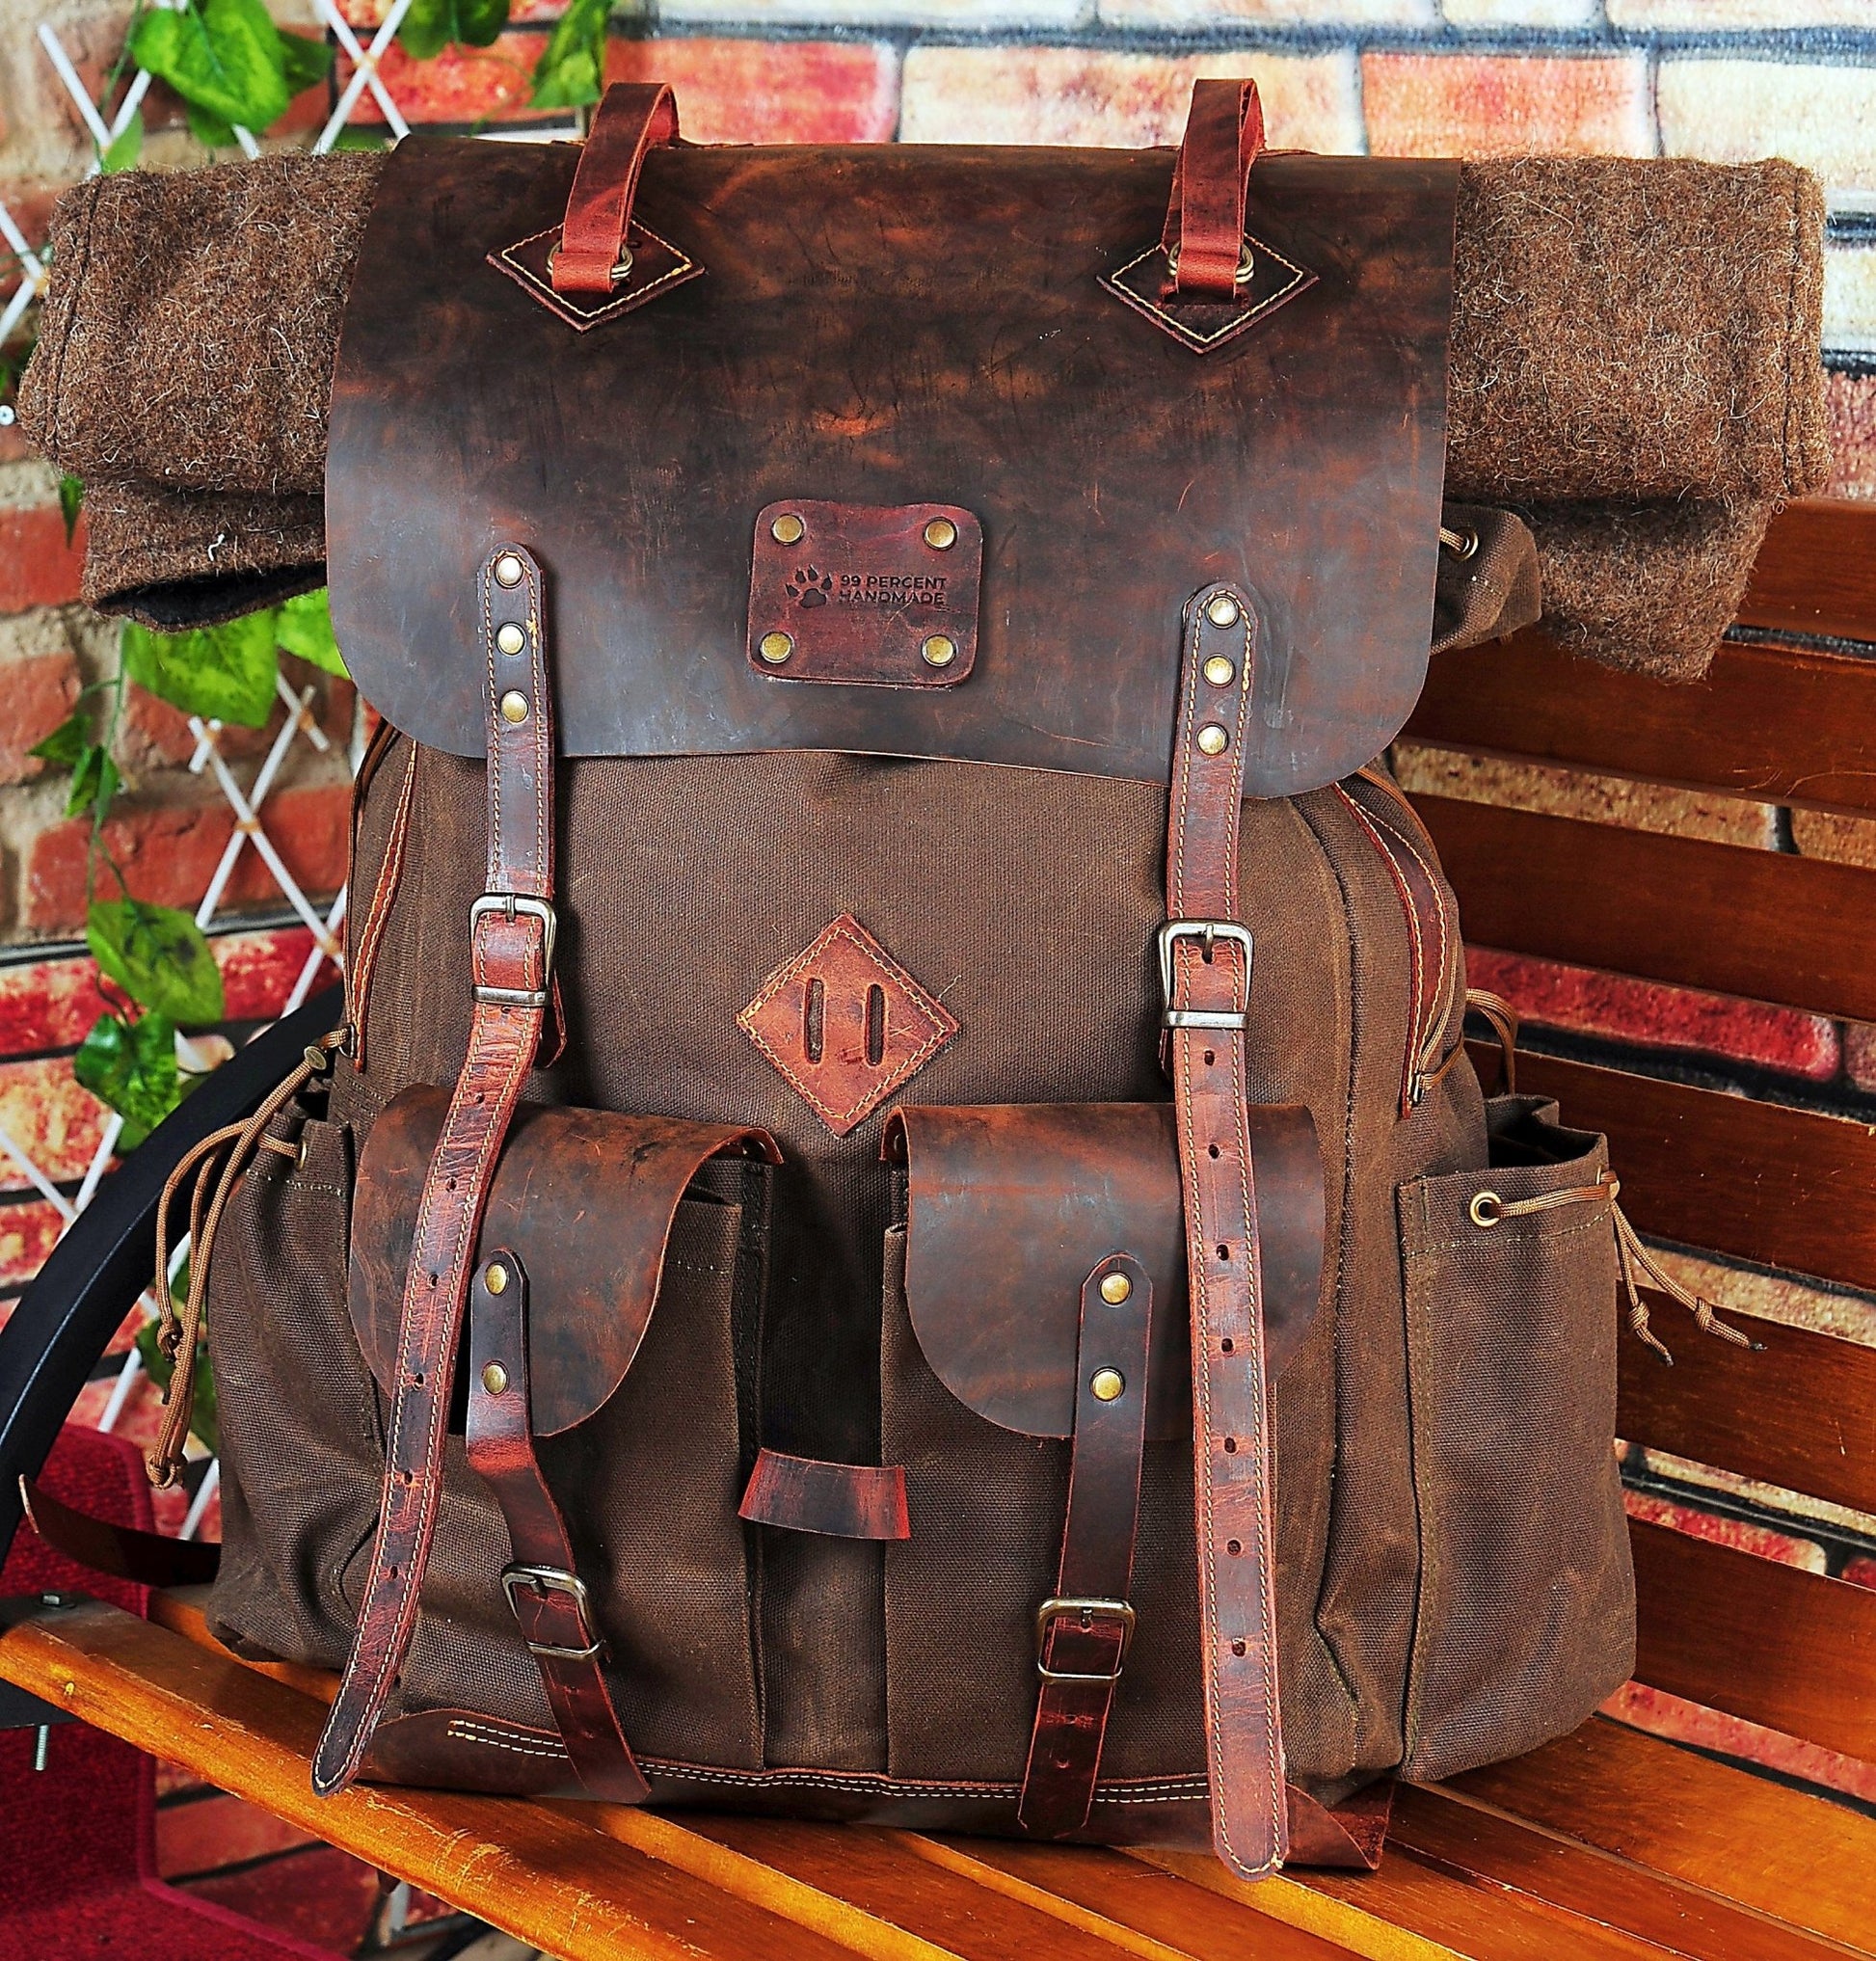 Bushcraft Backpack with Axe Holder | Handmade | Leather | Waxed Canvas Backpack | Camping, Hunting, Bushcraft, Travel  | Personalization bushcraft - camping - hiking backpack 99percenthandmade   